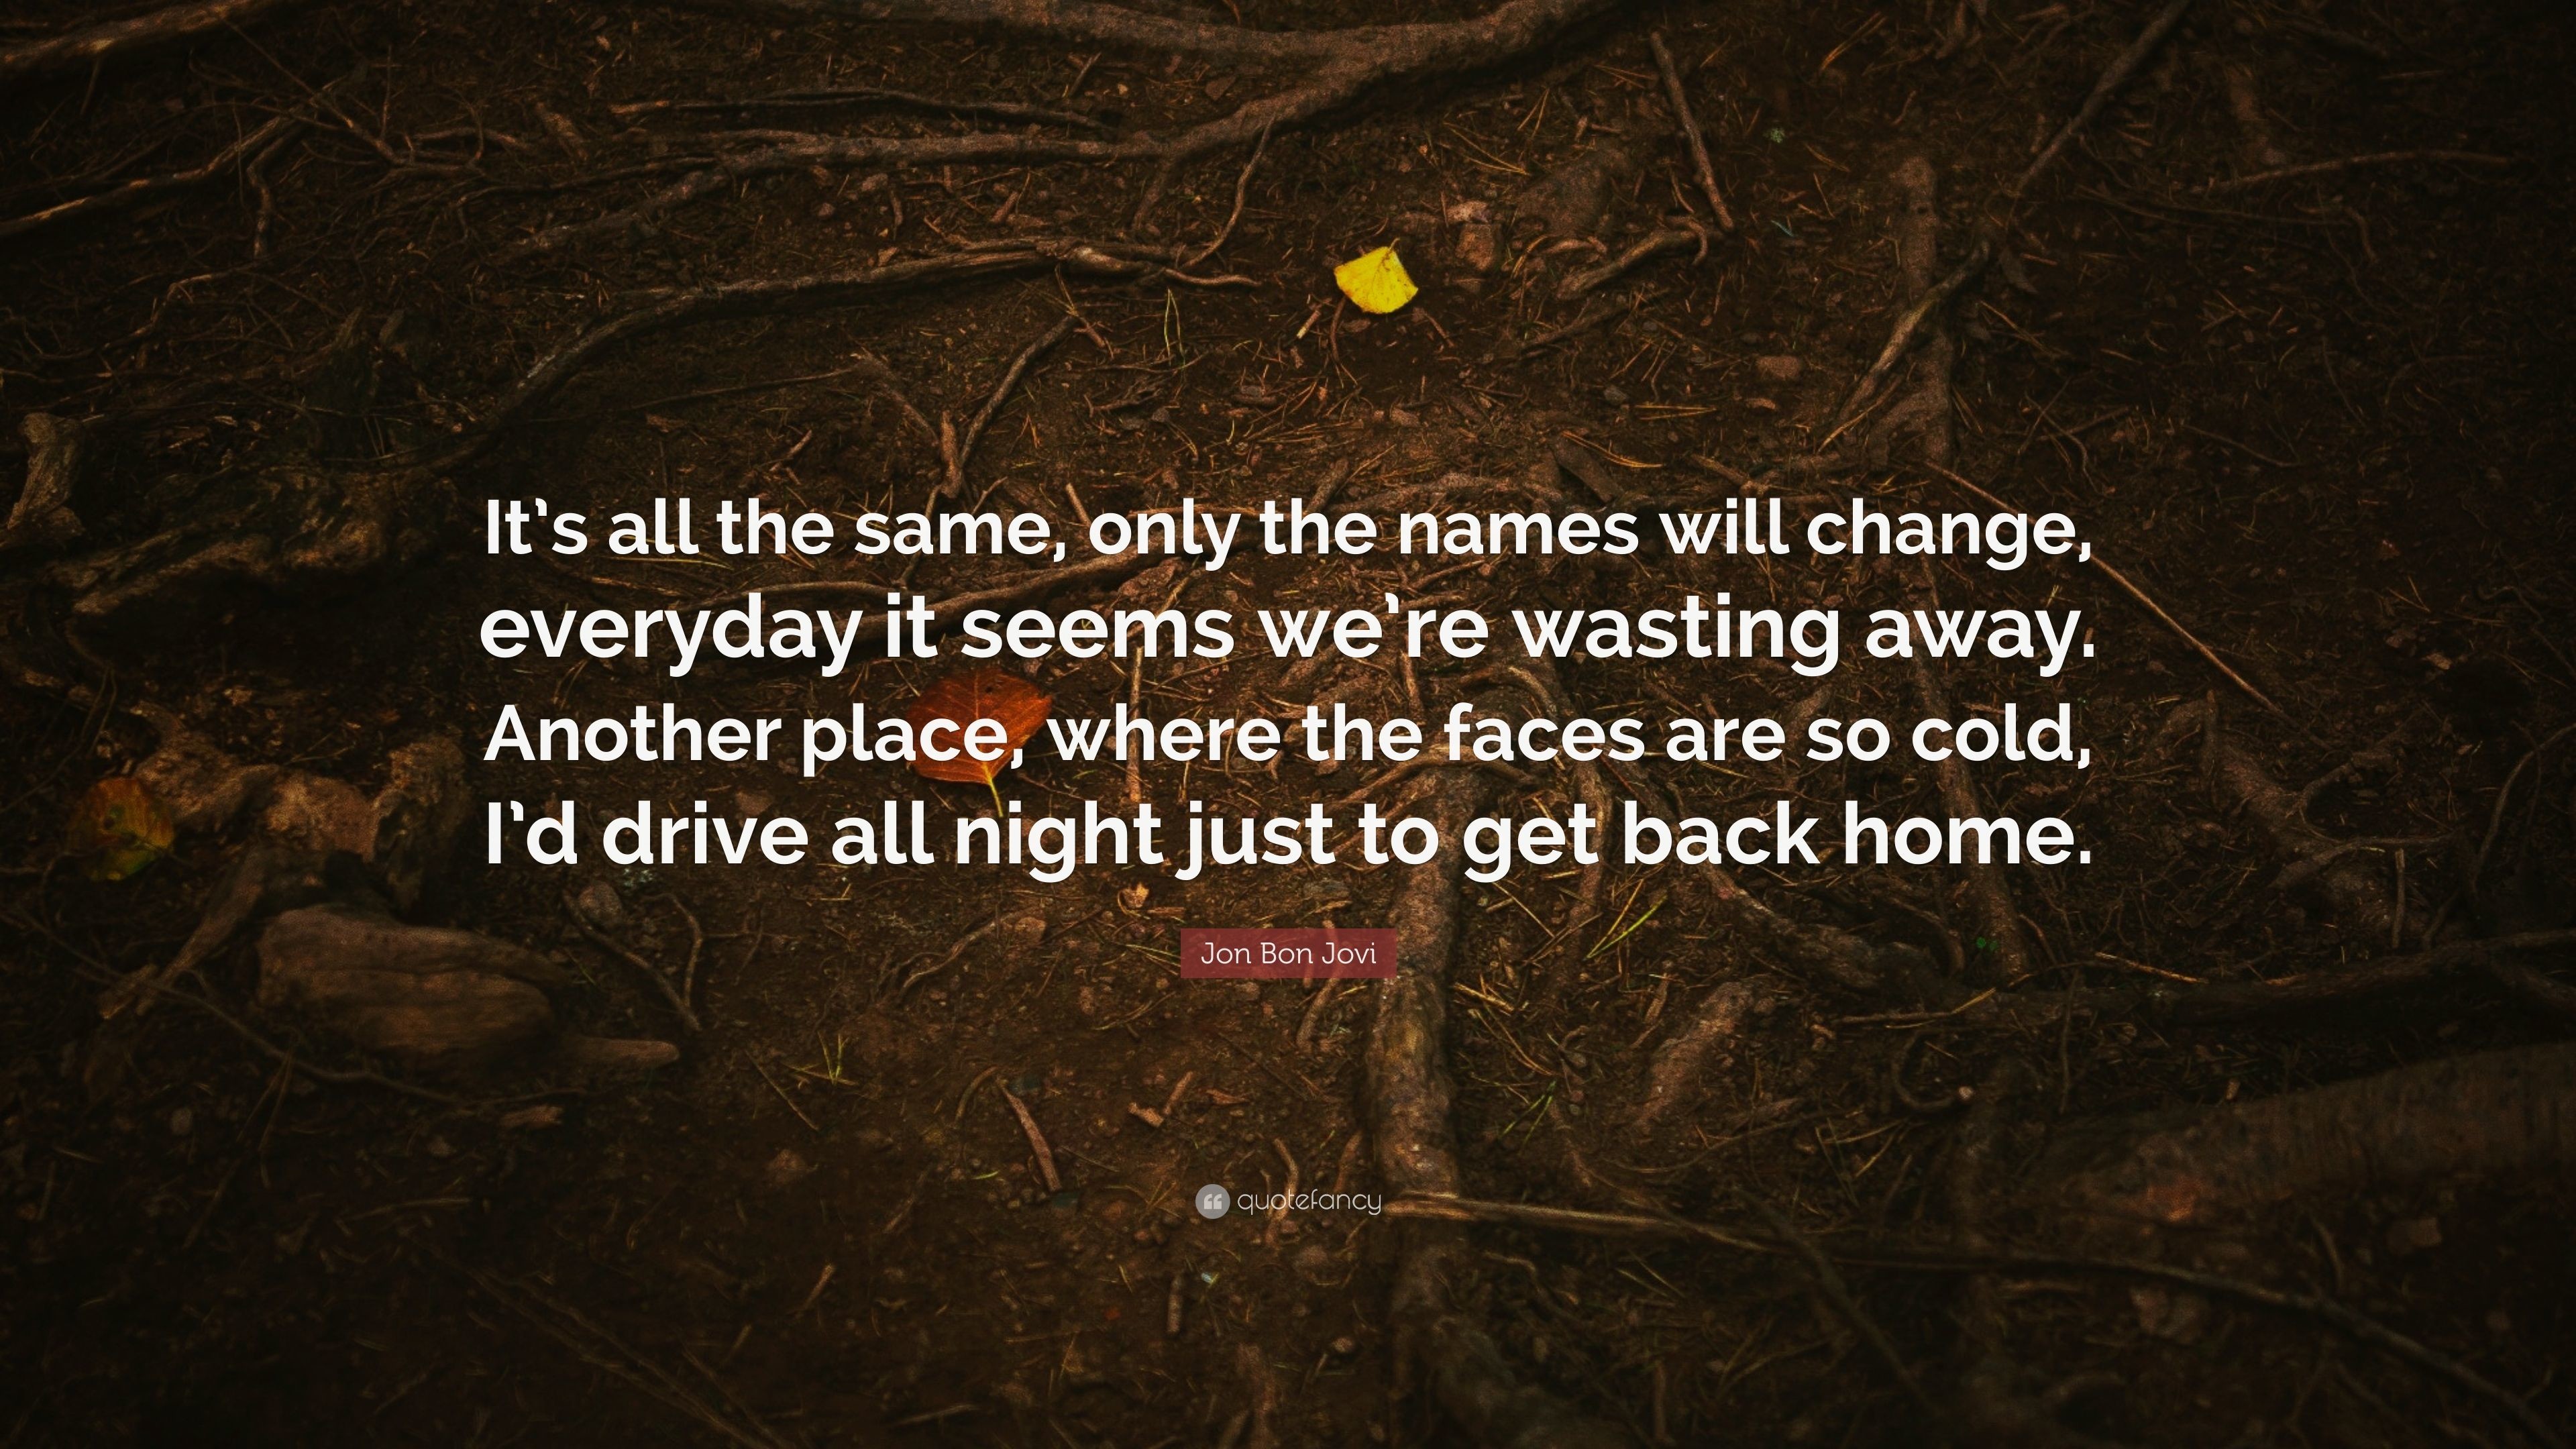 3840x2160 Jon Bon Jovi Quote: “It's all the same, only the names will change